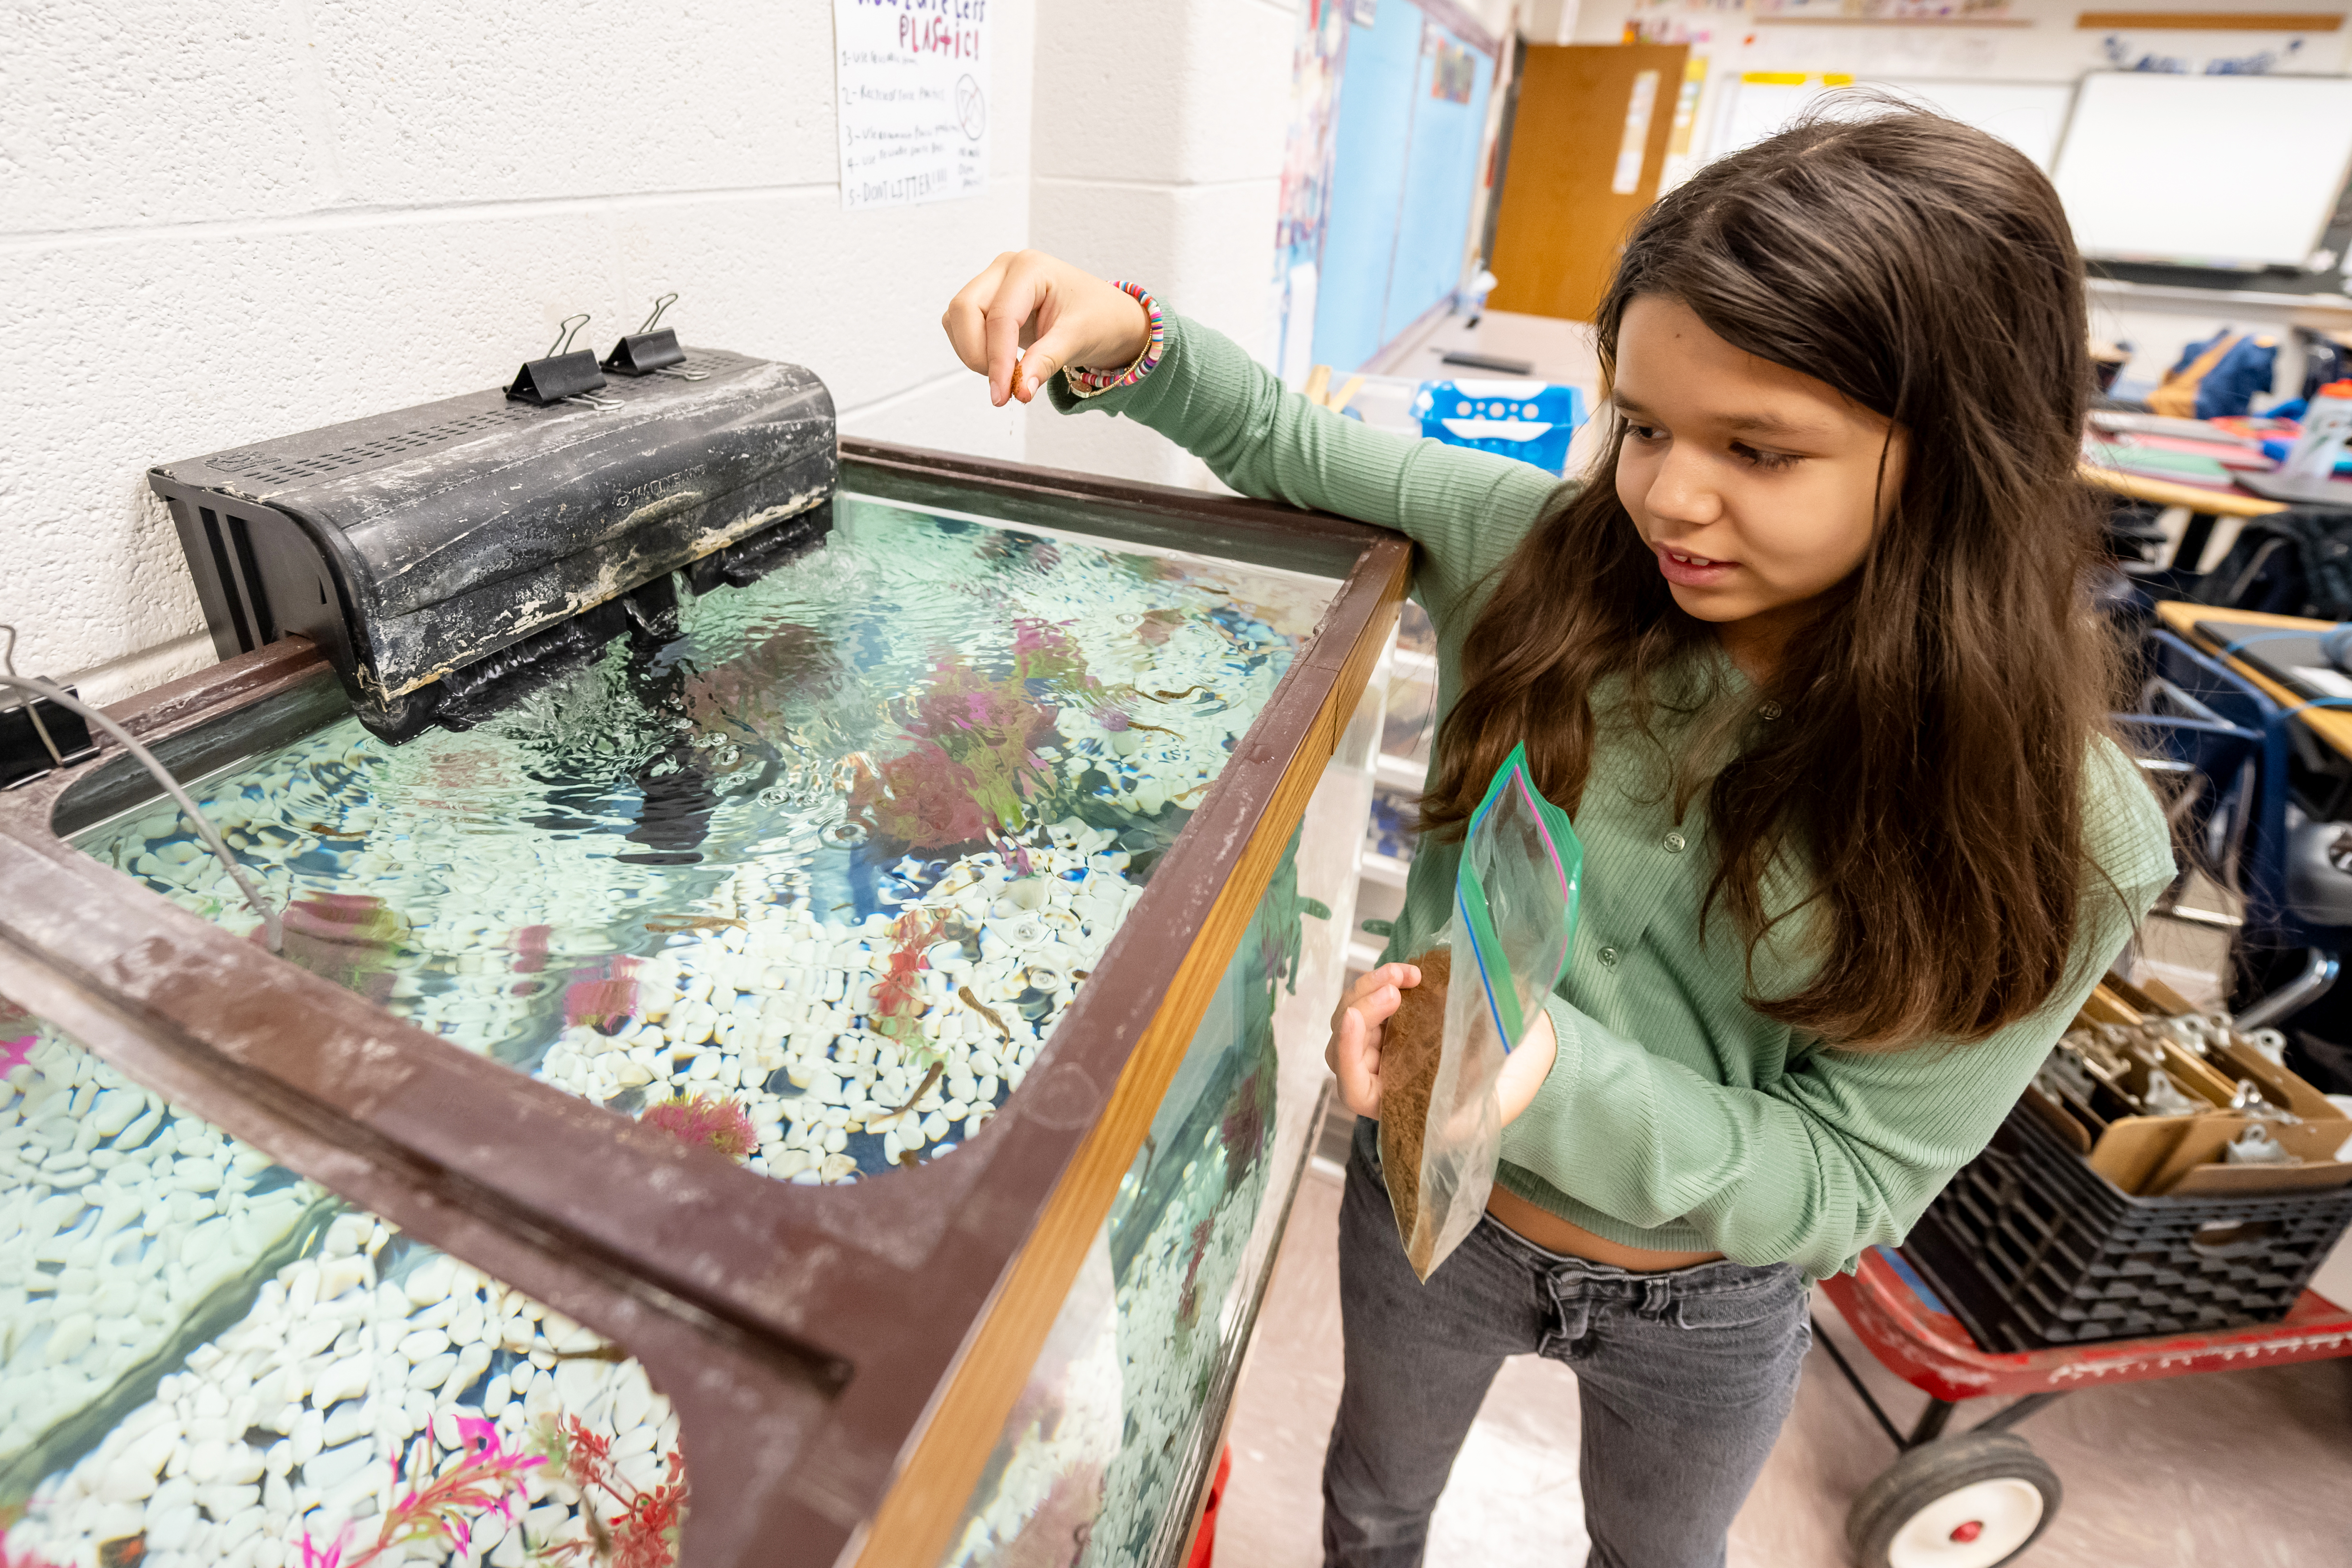 A student sprinkles fish food into the trout tank.